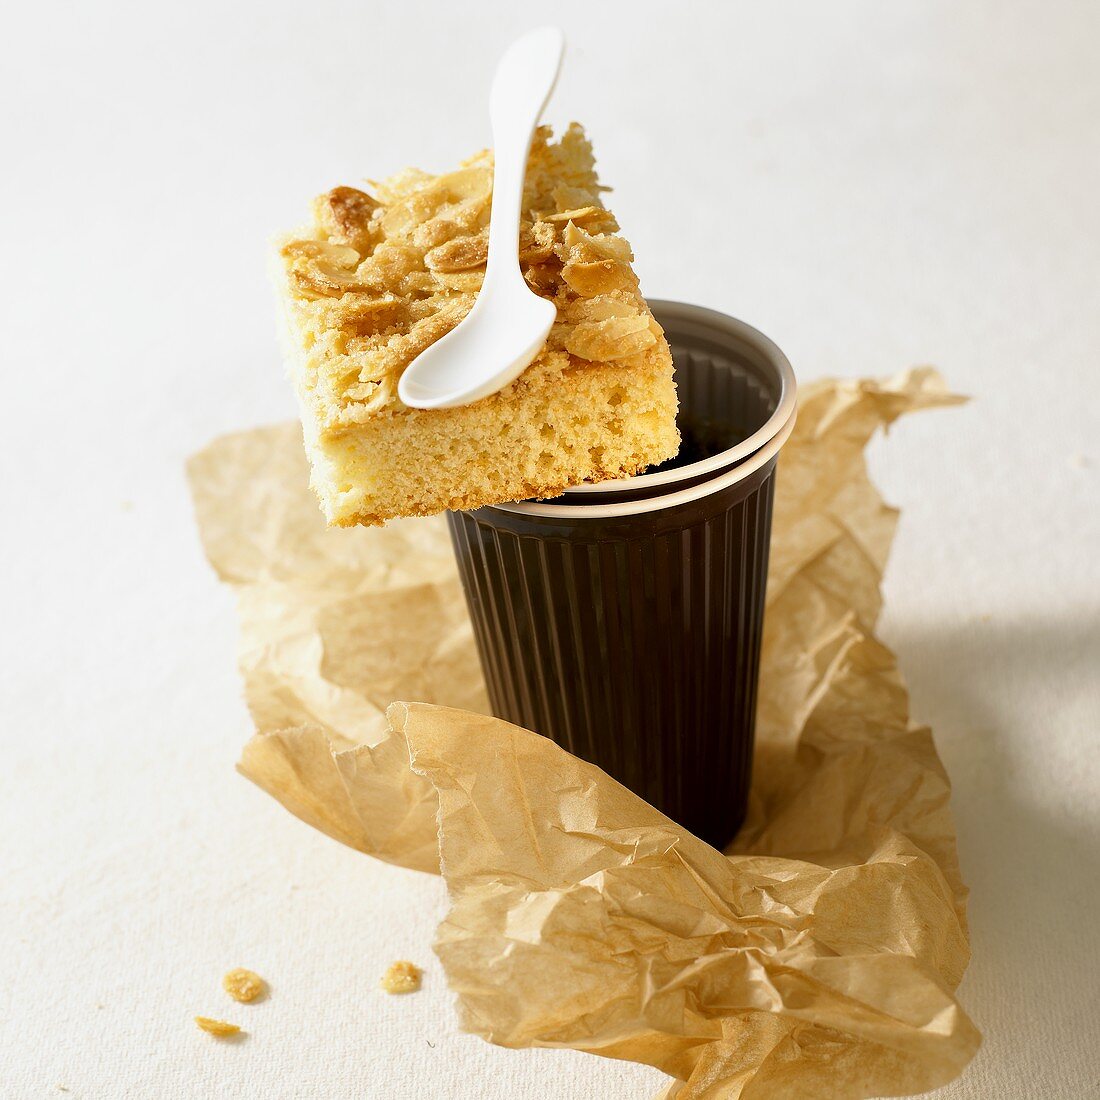 Piece of butter cake with flaked almonds on coffee mug